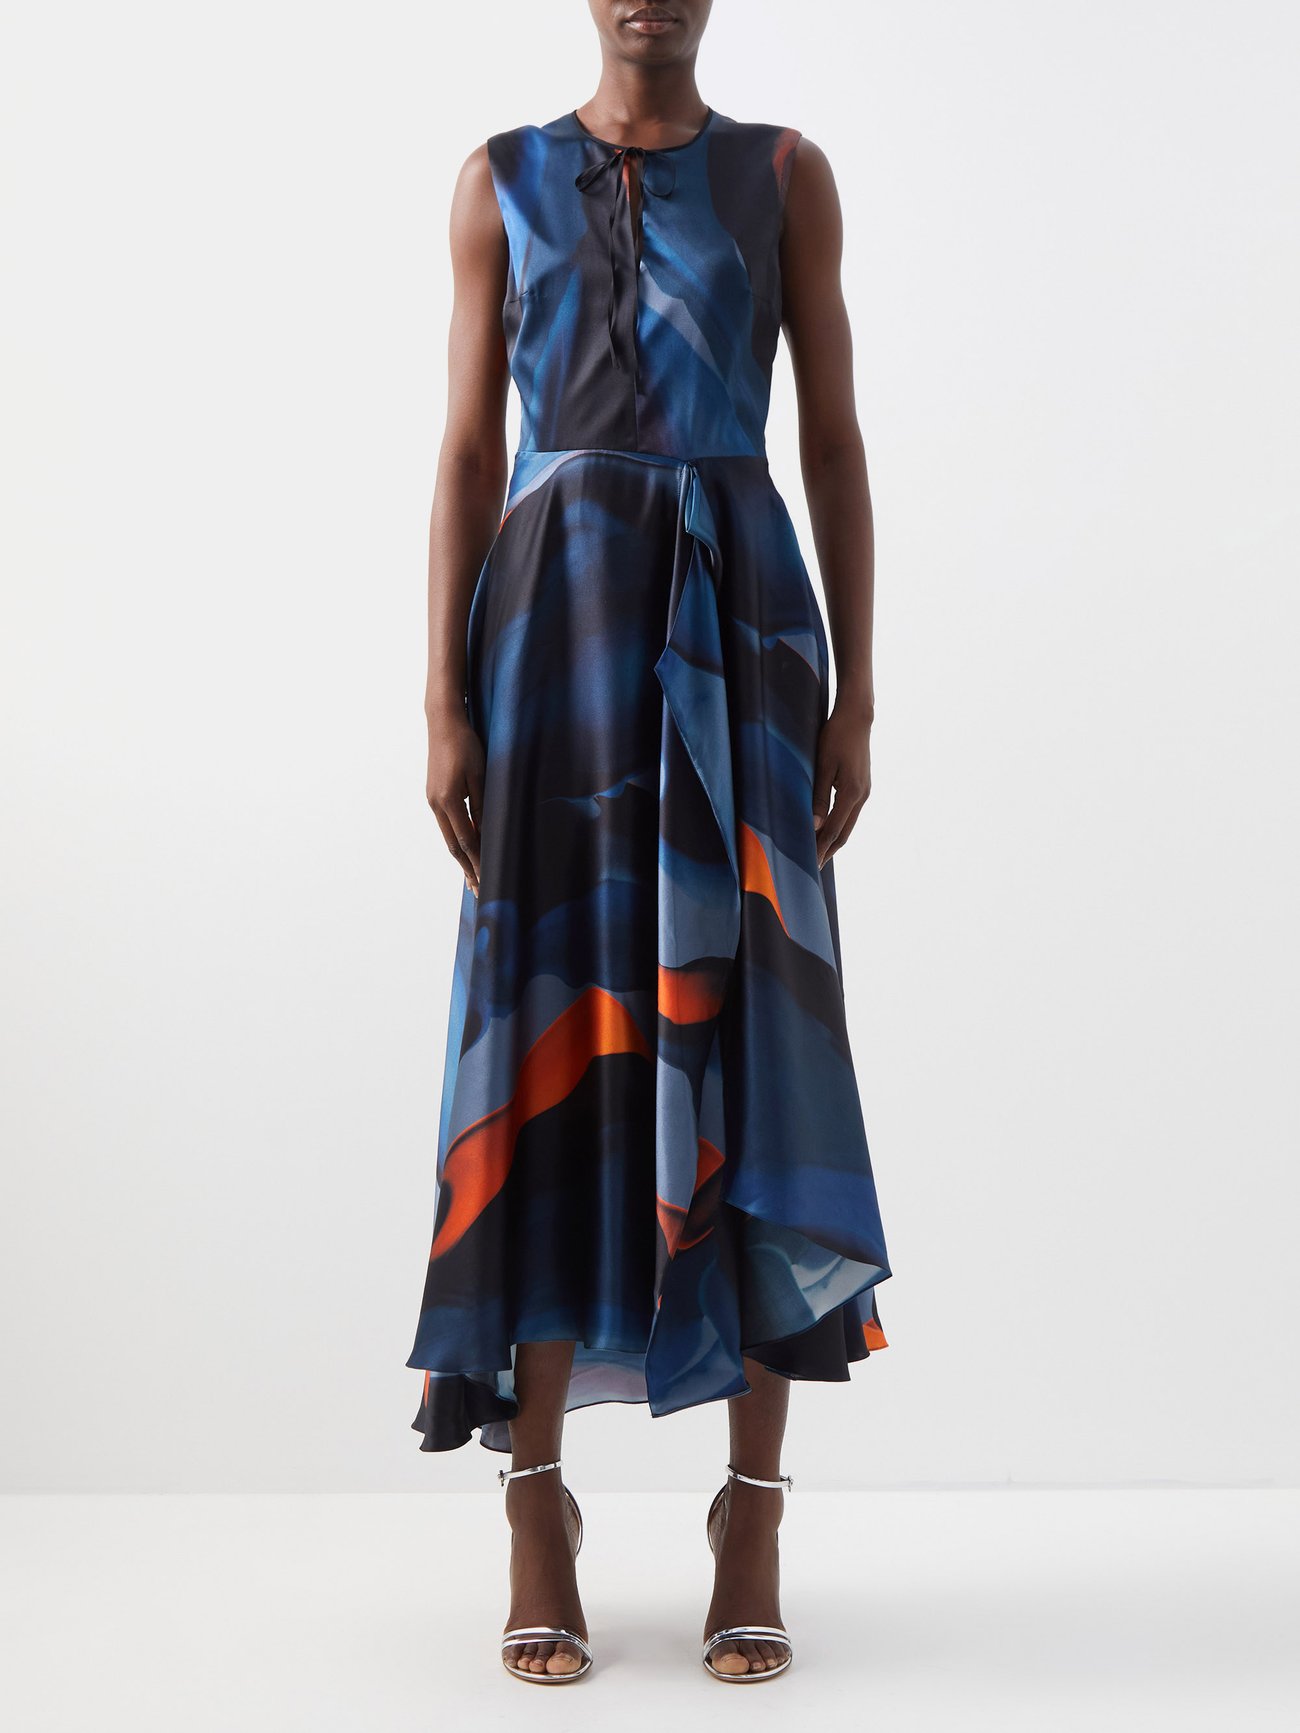 Roksanda Ilincic references her architectural studies for this blue Hamina midi dress, which is crafted from lustrous silk with a marble print and asymmetric hem. It has flashes of orange across the loose fit skirt. It's fitted at the waist and has a round neck with wide straps and a tie detail at the neck with the tiniest opening. 